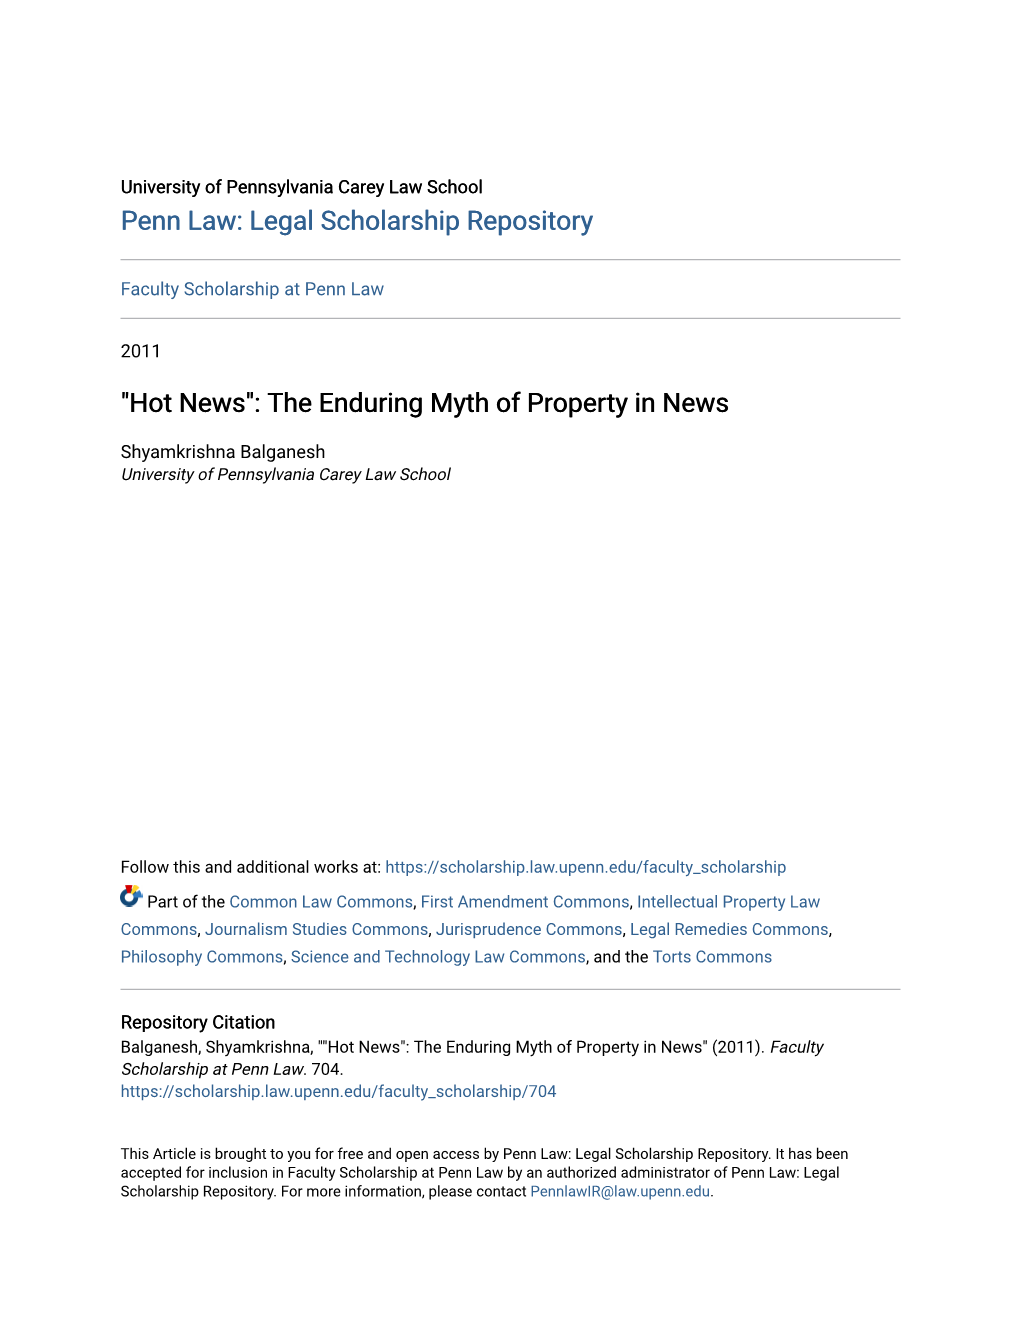 Hot News": the Enduring Myth of Property in News